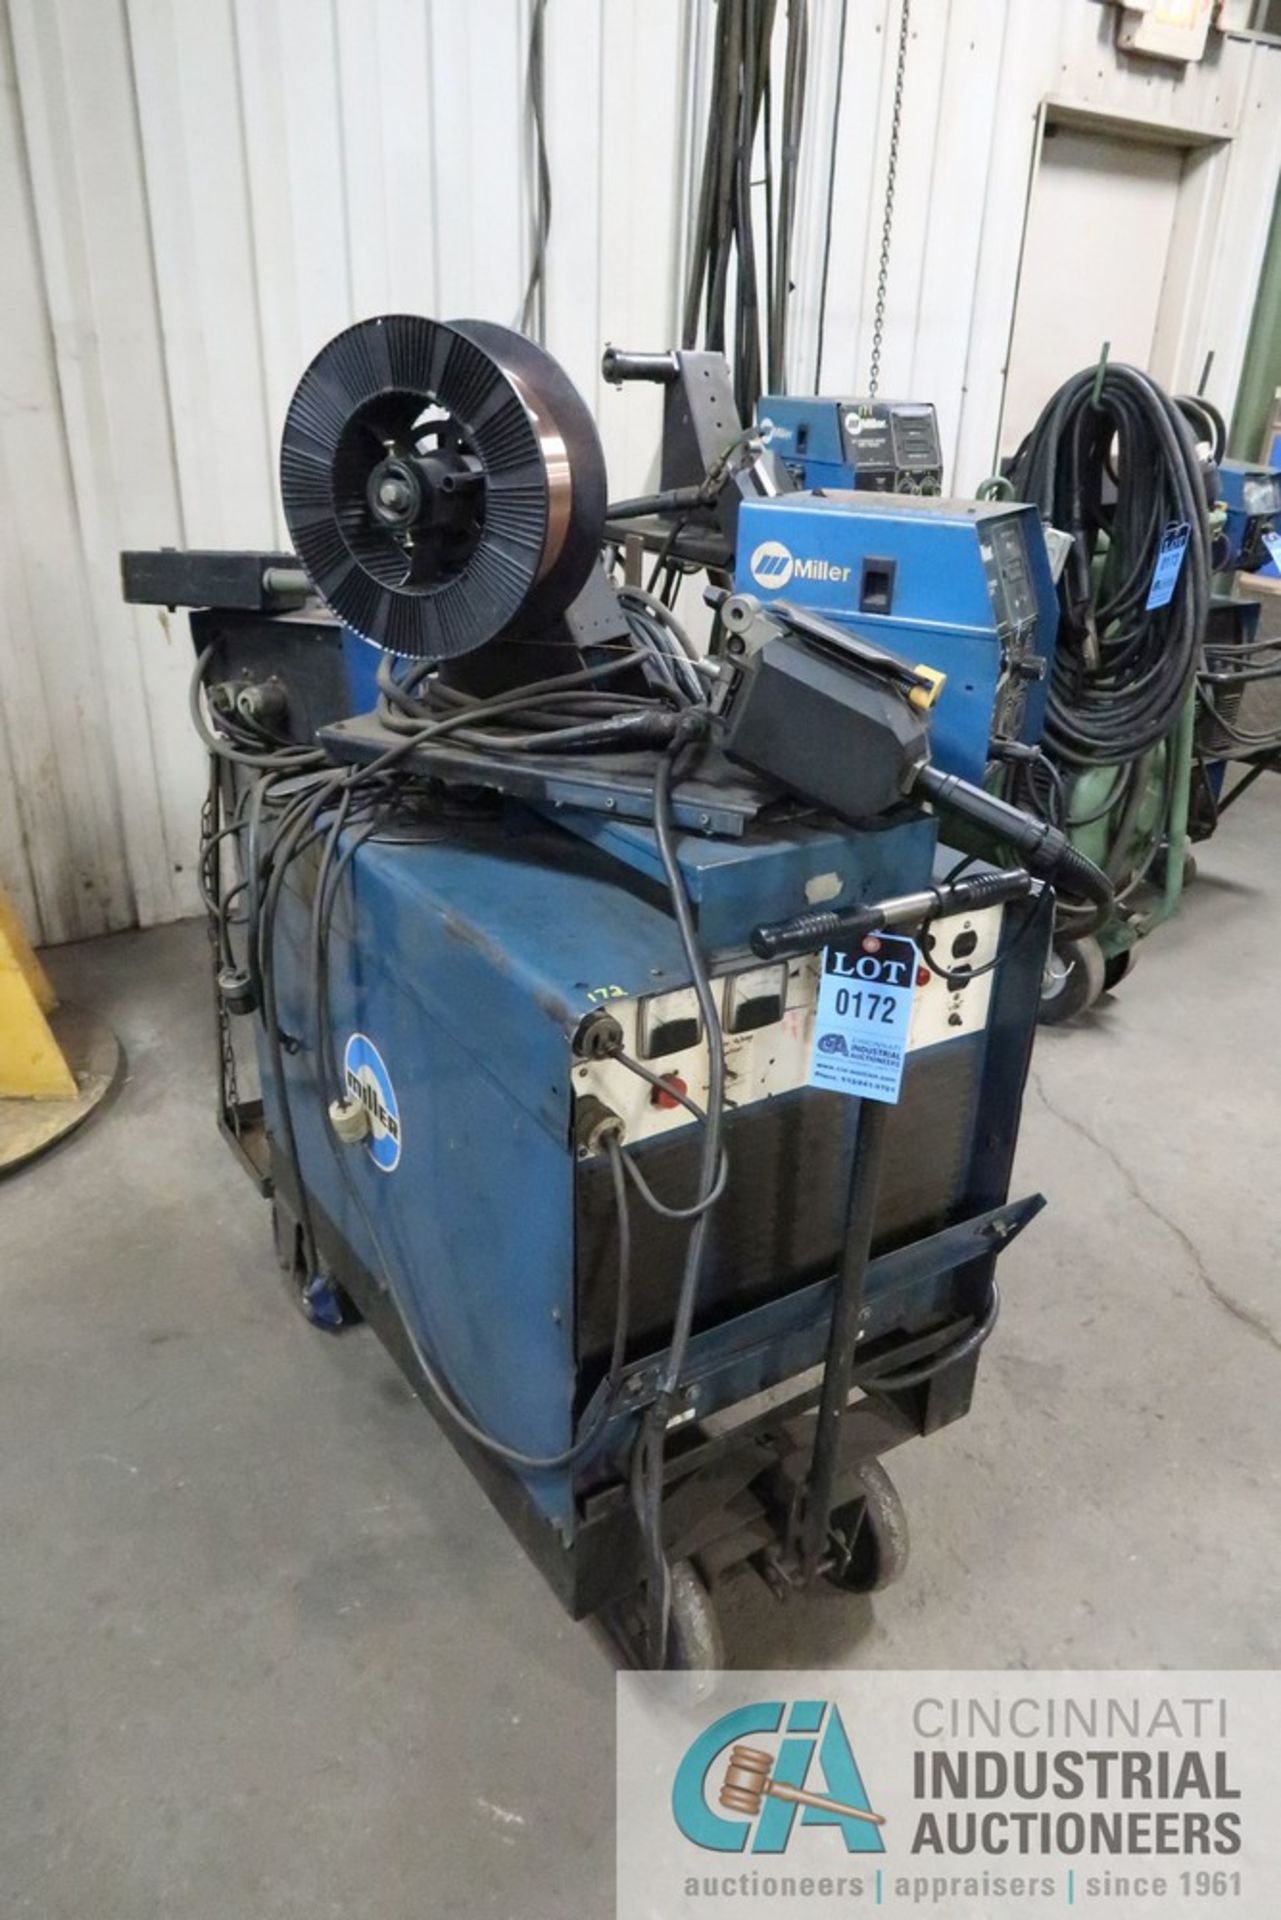 MILLER WELDING POWER SOURCE WITH MILLER 24V CONSTANT SPEED WIRE FEEDER AND SPOOLMATIC FEEDER GUN